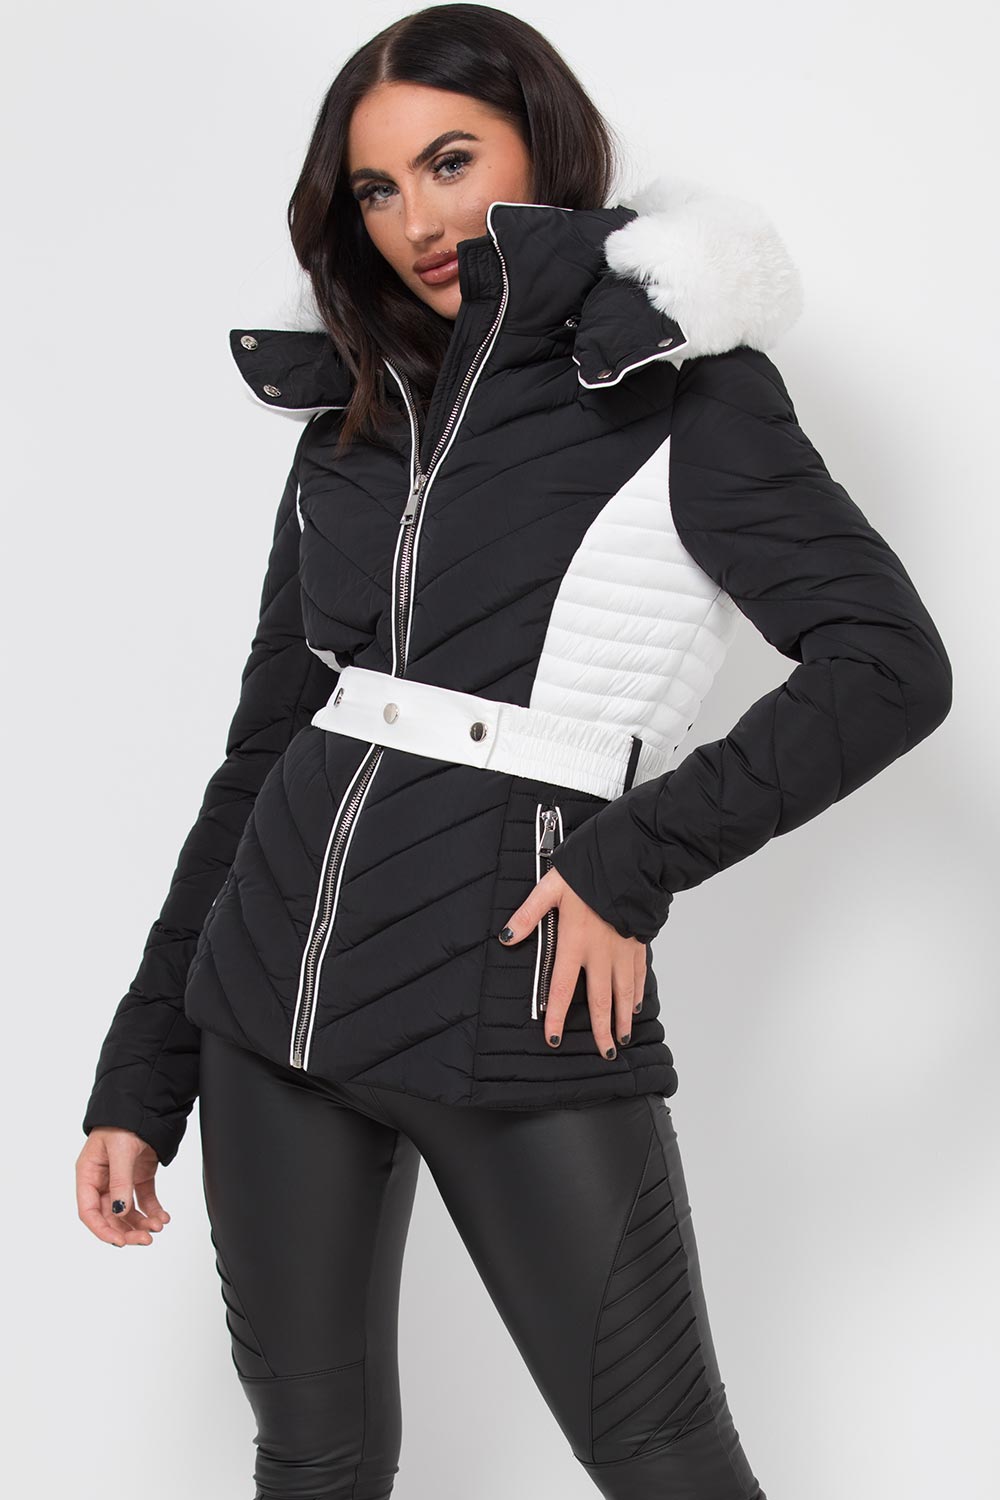 womens puffer jacket with fur hood black and white